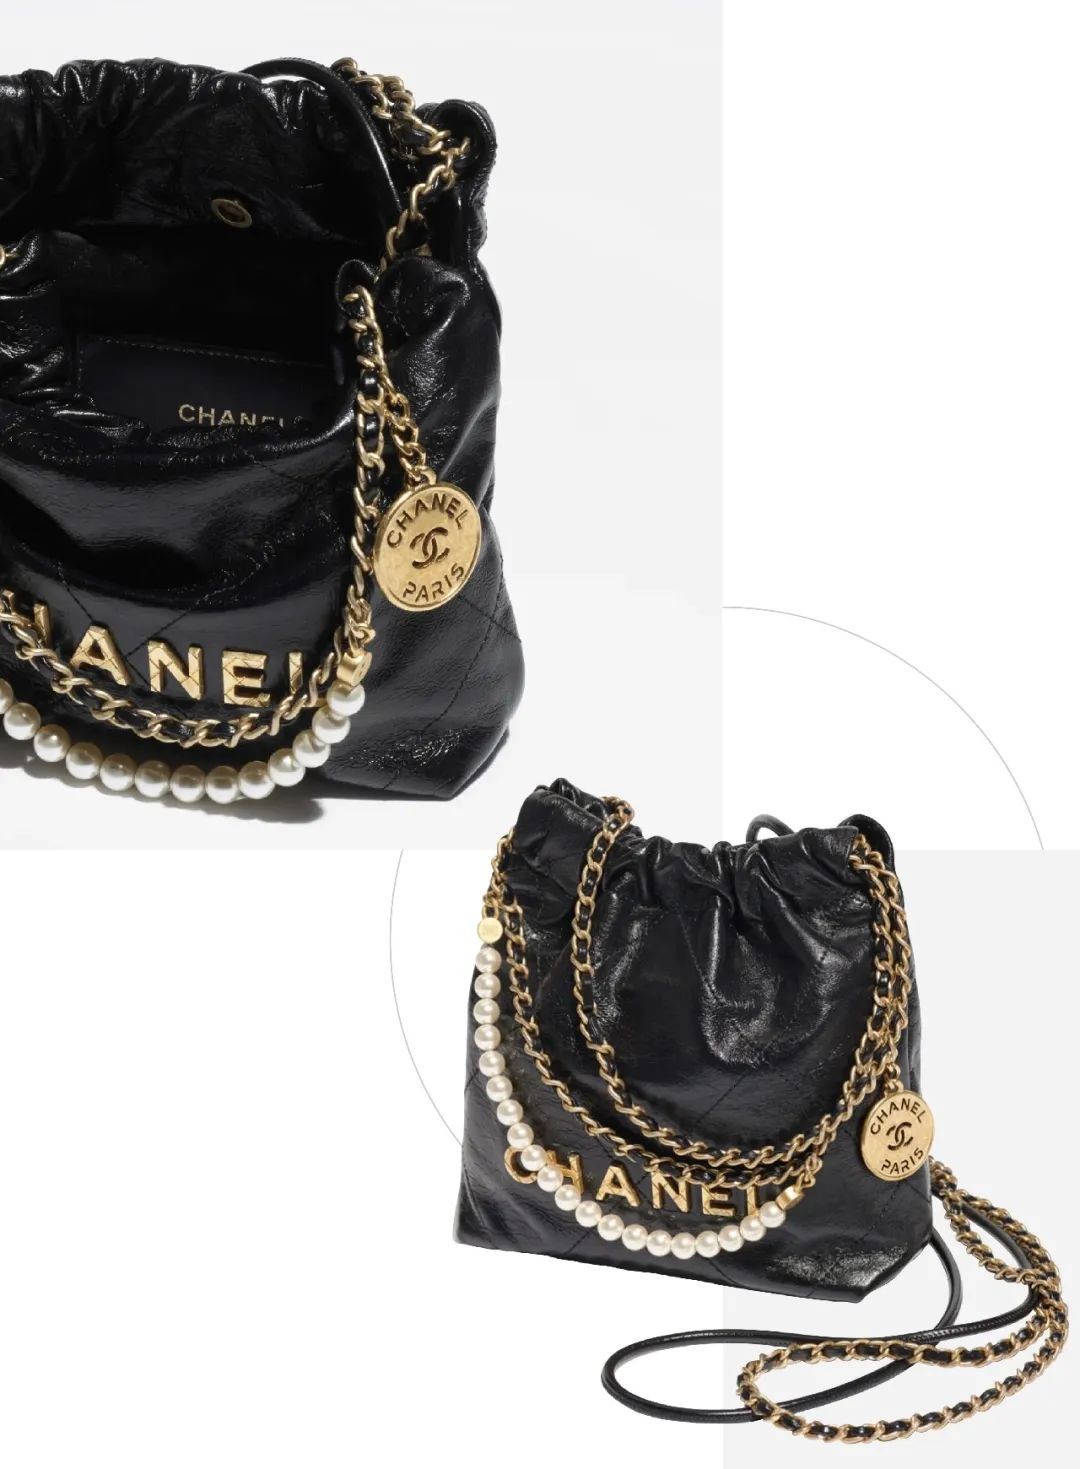 The much anticipated Chanel 22 Mini bag, coming soon! (2023 spring updated)-Best Quality Fake designer Bag Review, Replica designer bag ru